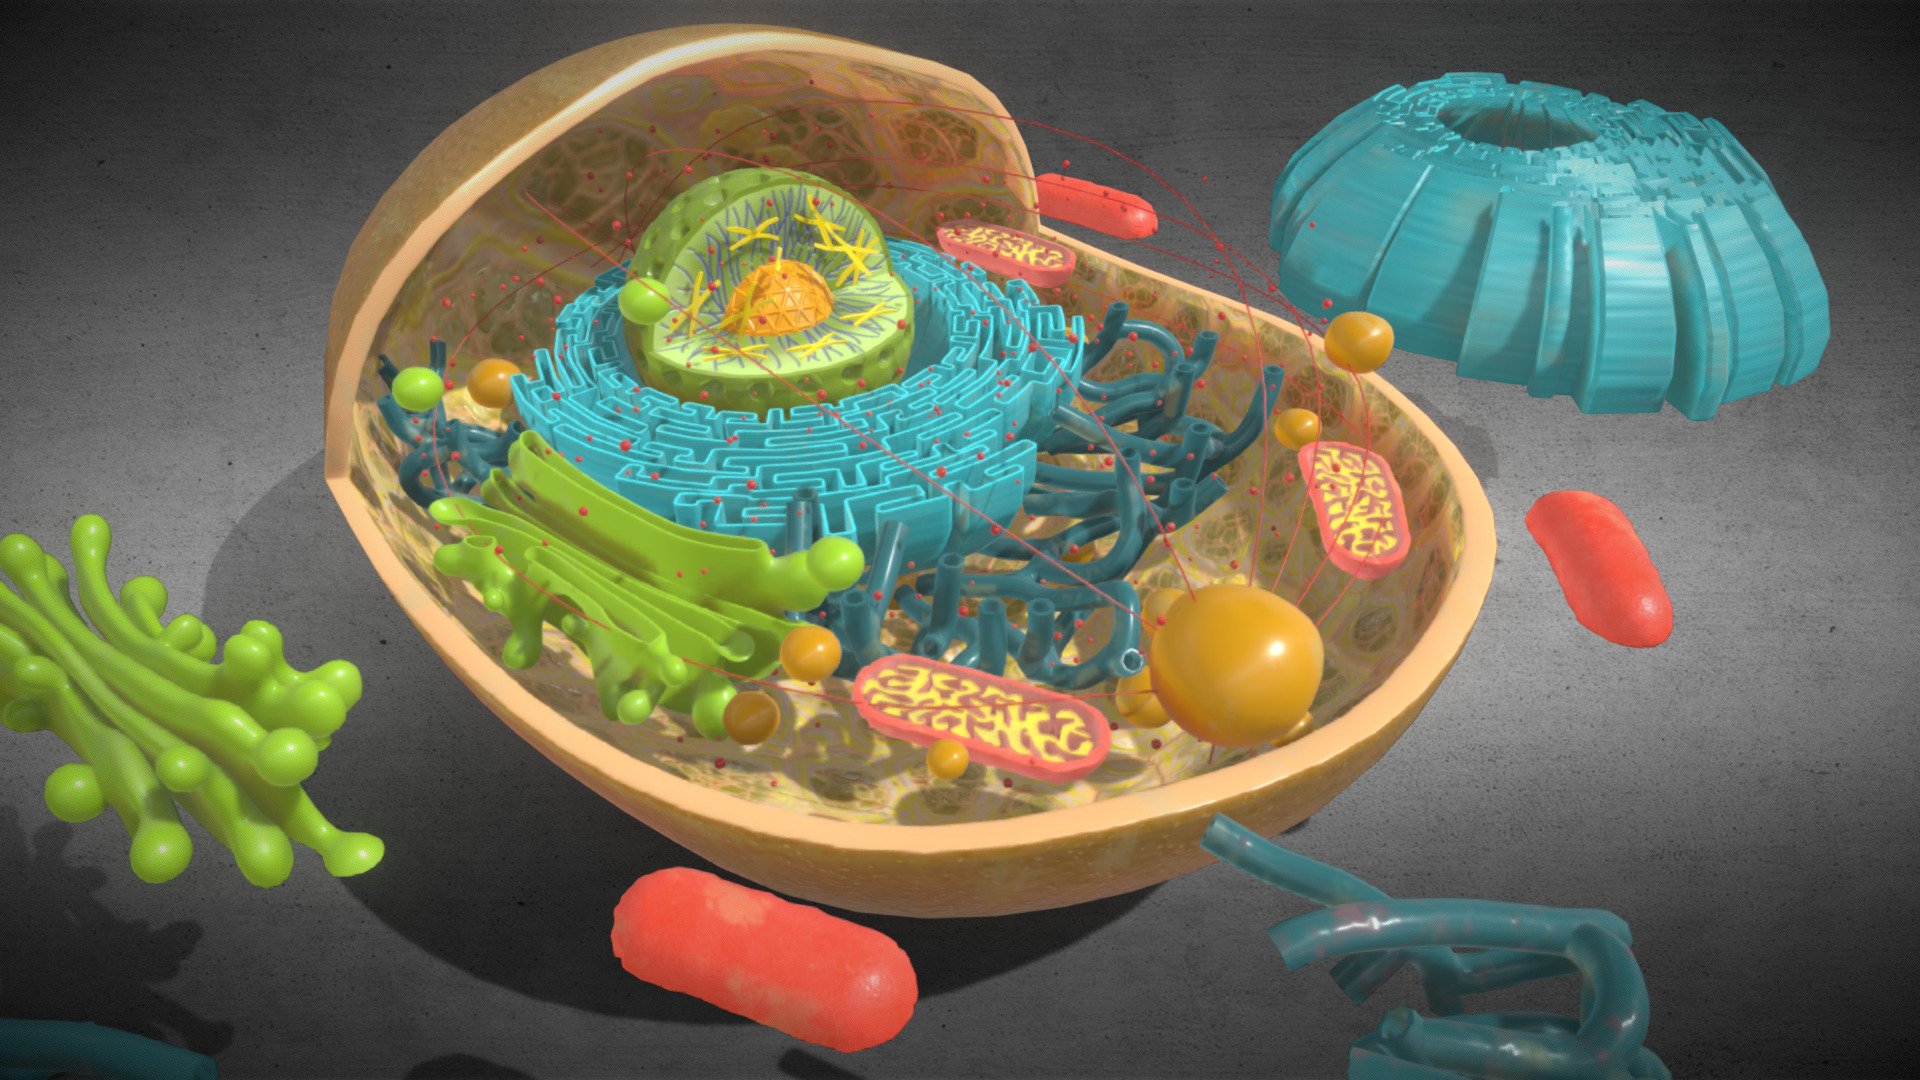 3D Animal Cell Structure

Features:




No errors or missing files

High-quality polygonal model

No N-GONS Faces

This model is created in polygon quad &amp; tri with good edge flow, So you can edit and change it according to your requirements.

HDR Light Map is included if necessary .

PBR textures are included.

The scene is well arranged (proper layer and group)

Objects, materials, and textures are named.

Up to 4K Textures






Polys: 183927

Verts: 188242

Polygon: Quad and Tri 

Textures:
* Animalcell_Mtl -------------- 4096x4096--------PNG--------8




AO

Diffuse

Base

Normal

Specular

Reflection

Metallic

Glossines

Roughness



Formats:




3Ds Max 2014 _V-Ray

3Ds Max 2012 _V-Ray

3Ds Max 2012 _Scanline

Maya 2016_V-Ray

Maya 2016_Default

Cinema 4D R15 _V-Ray

Cinema 4D R15 _Standard

FBX

OBJ

3Ds
 - 3D Animal Cell Structure - Buy Royalty Free 3D model by 3D4SCI 3d model